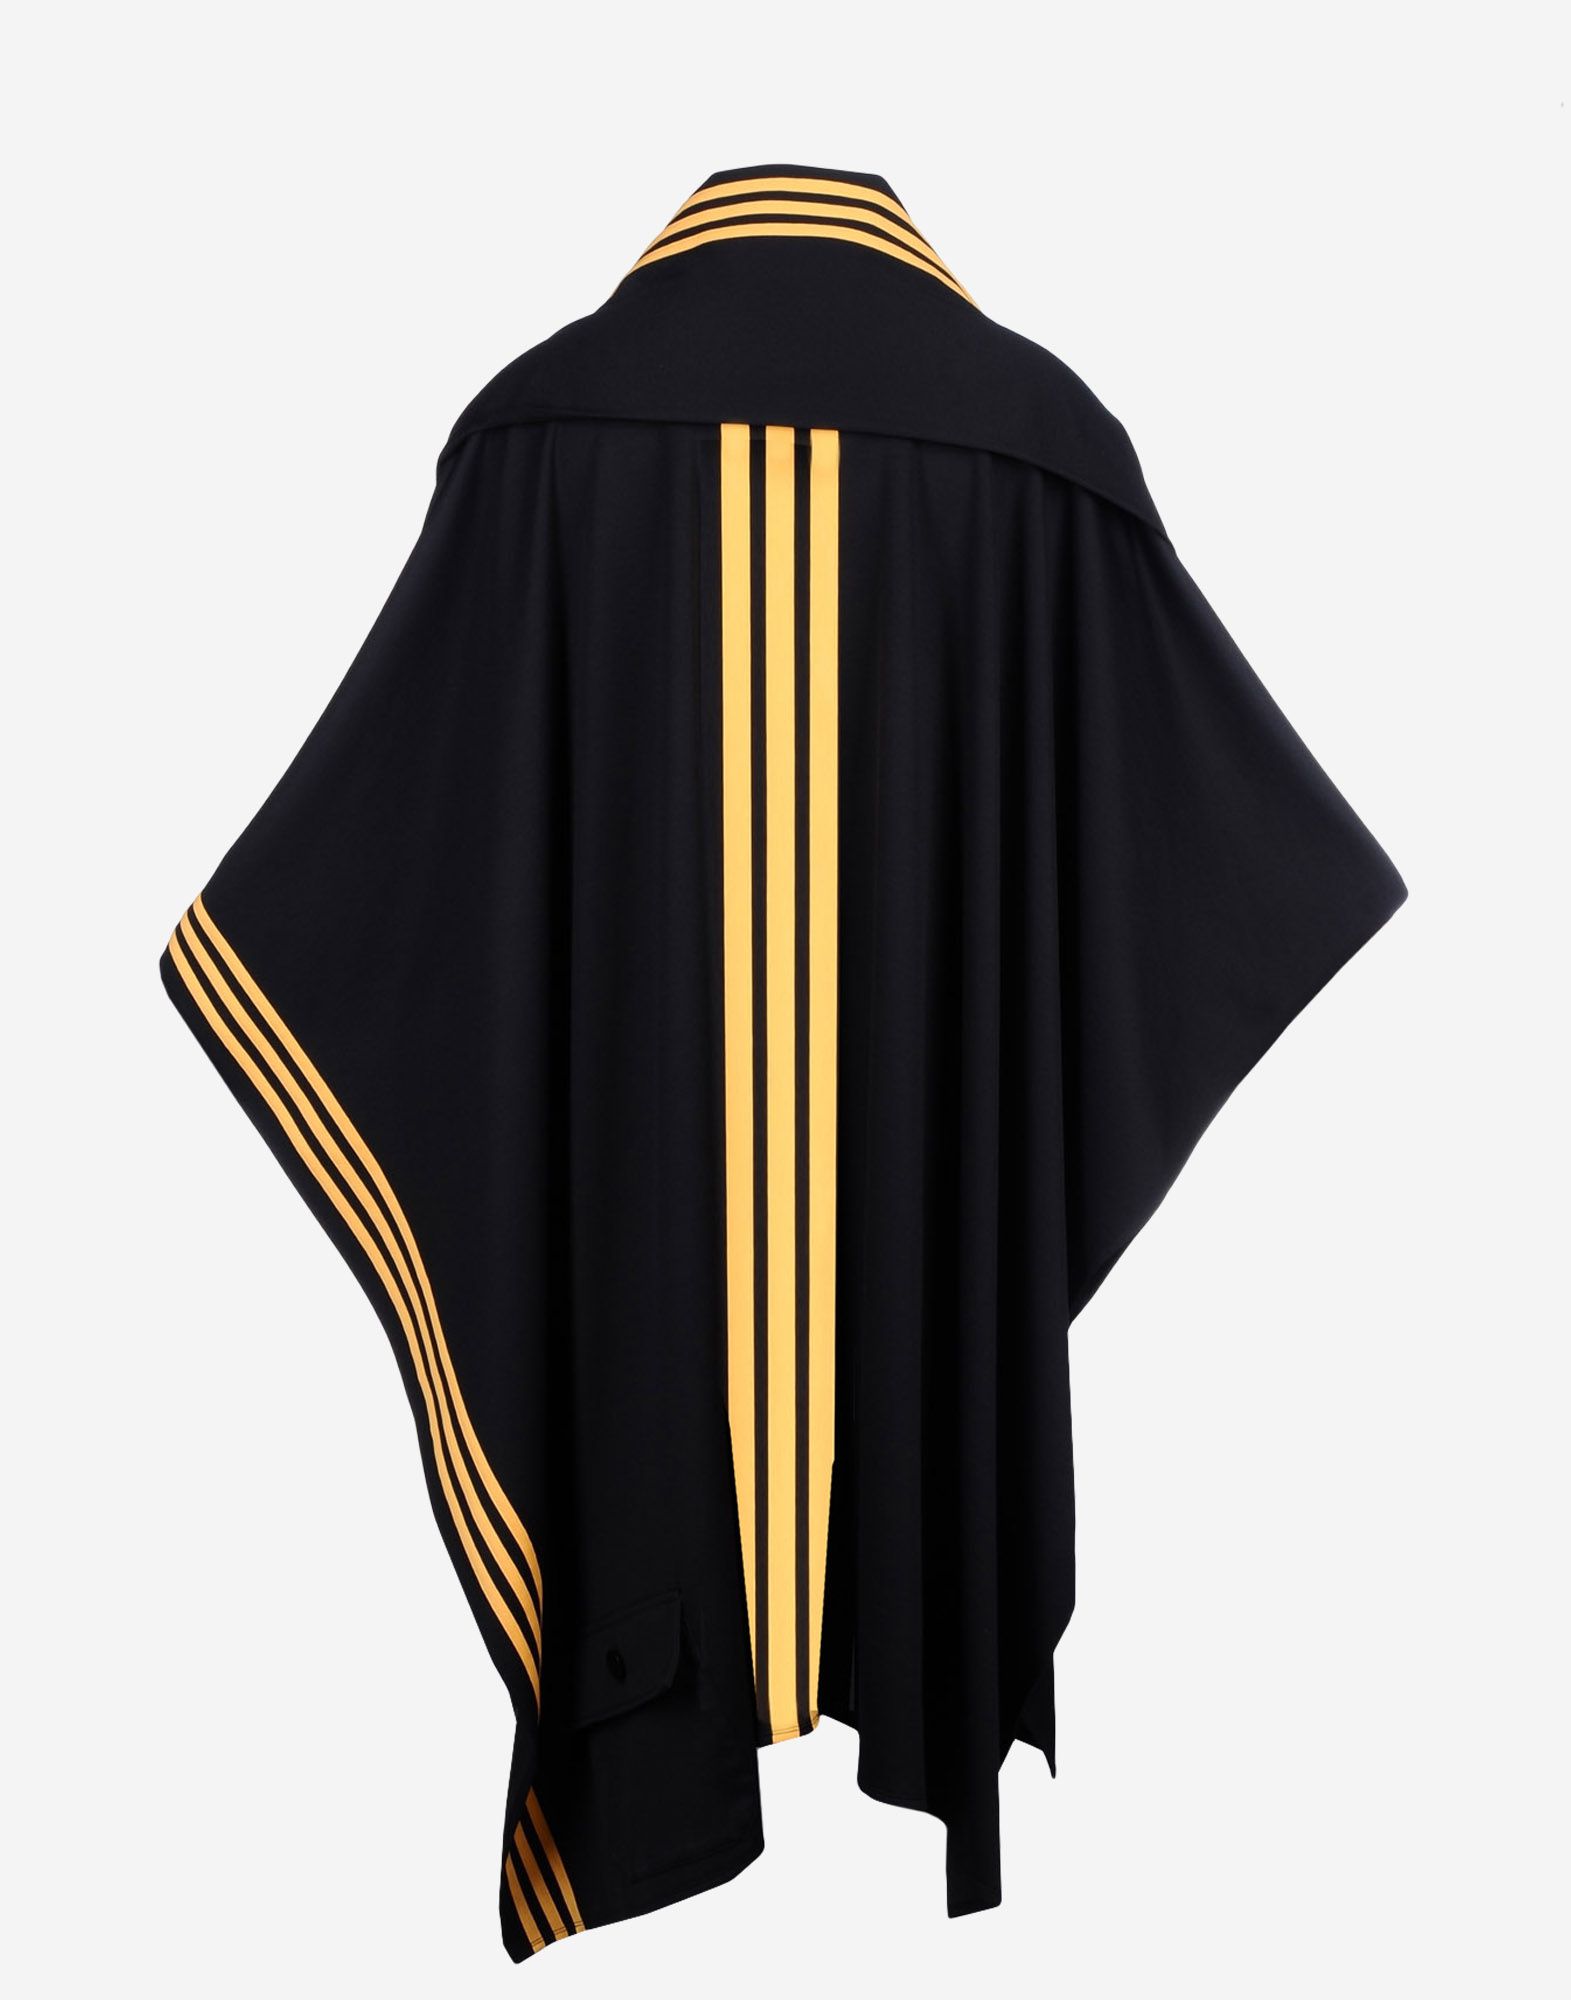 Y 3 Track Poncho for Men | Adidas Y-3 Official Store